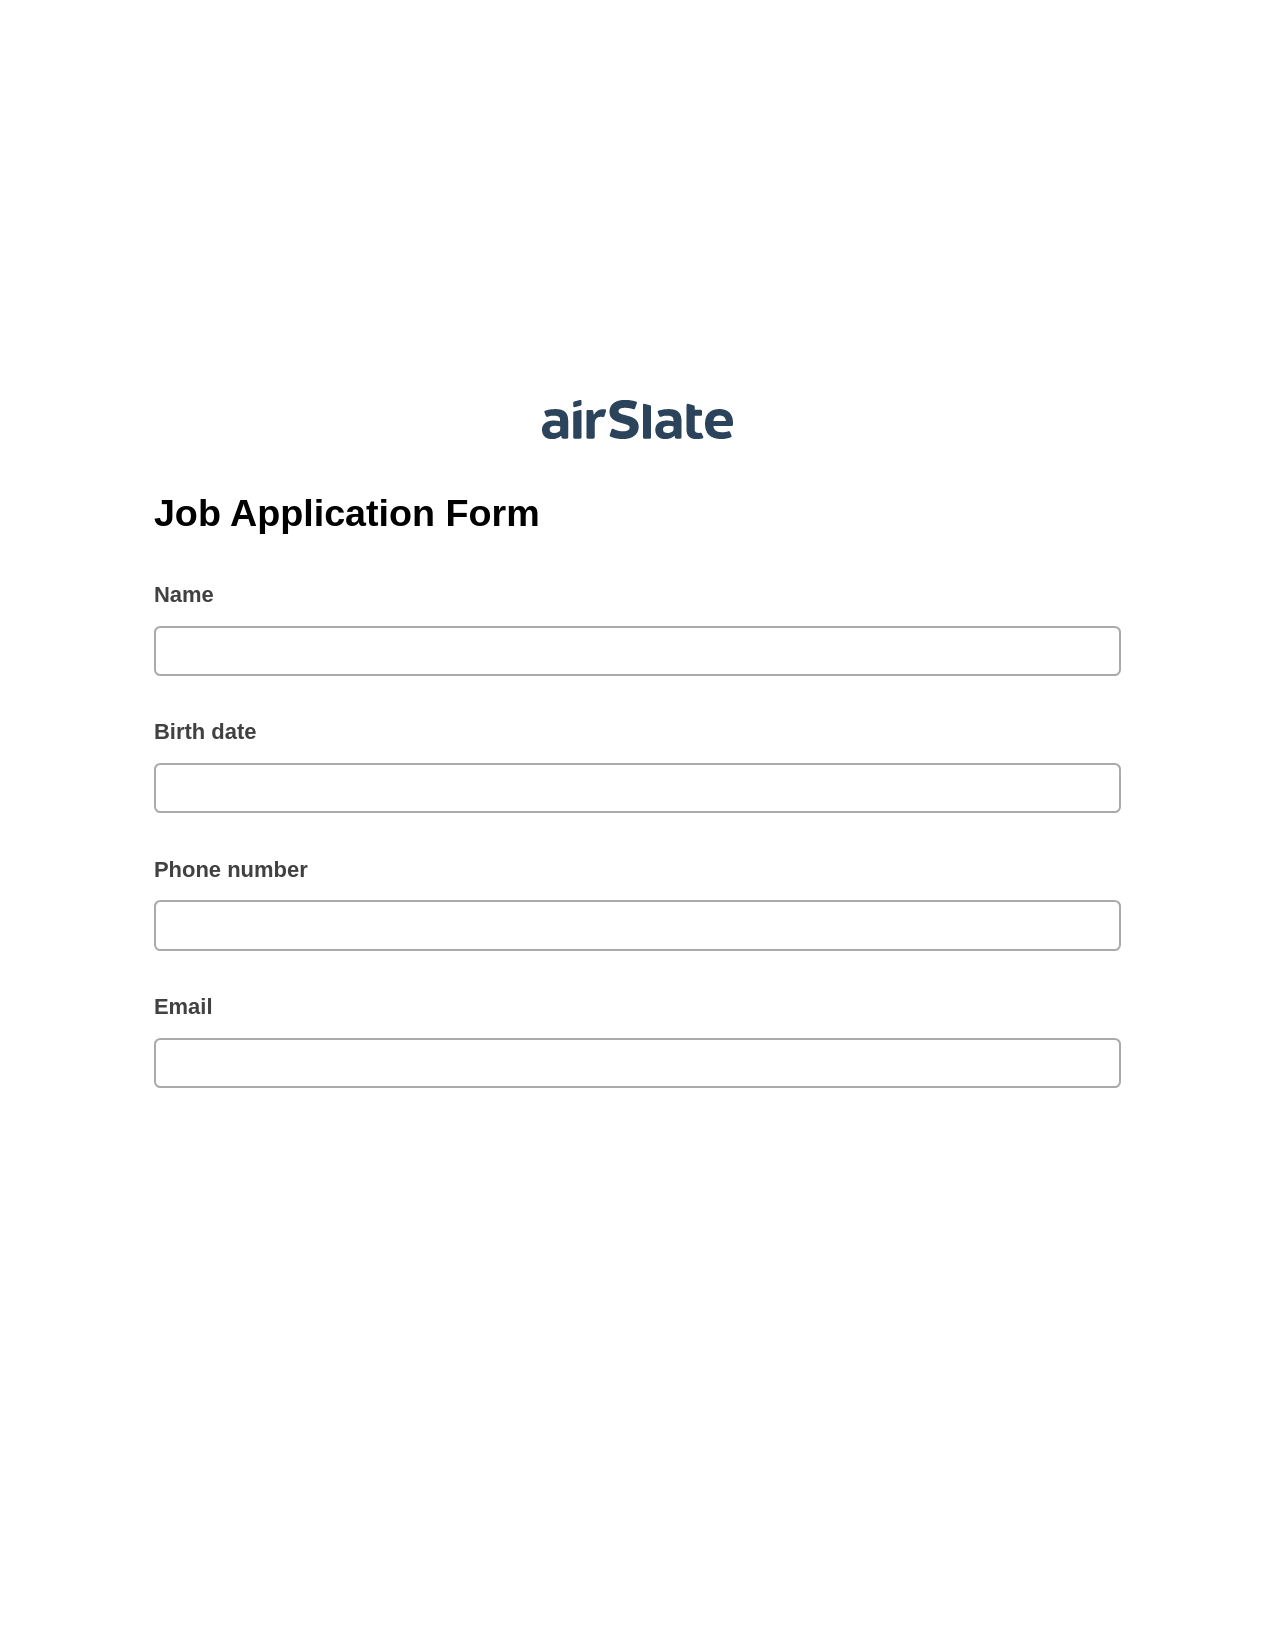 Multirole Job Application Form Pre-fill from CSV File Bot, Create Salesforce Record Bot, Post-finish Document Bot